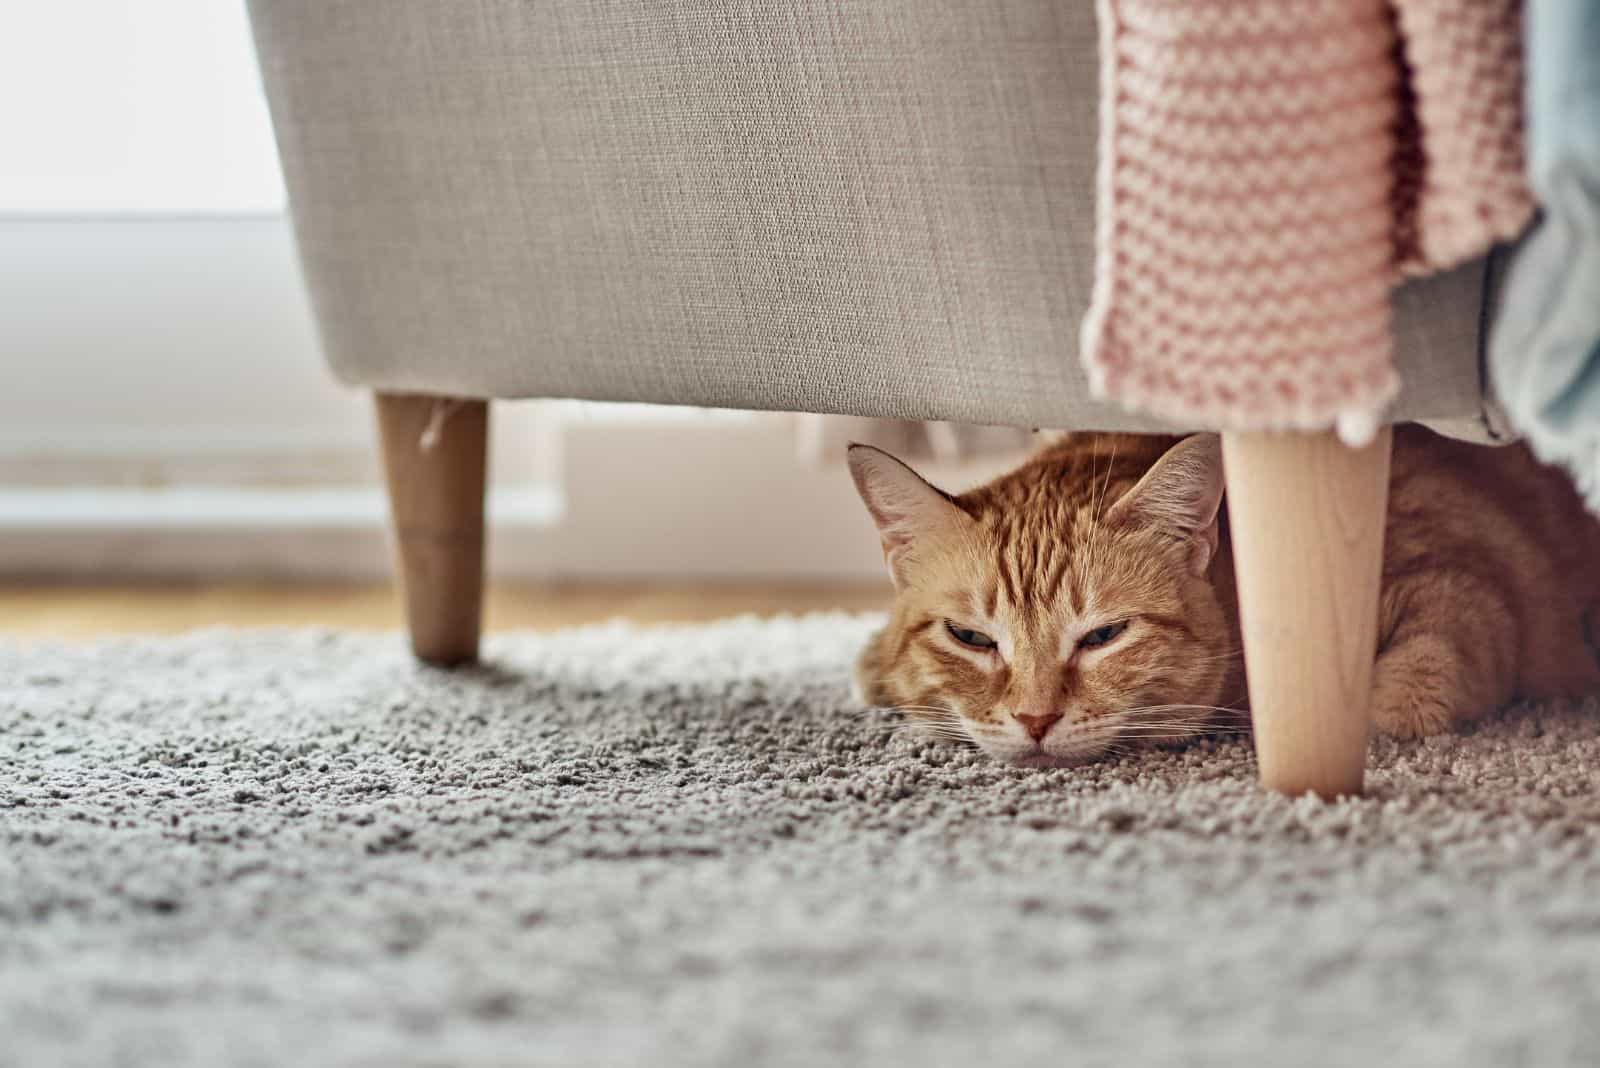 the cat is lying under the armchair